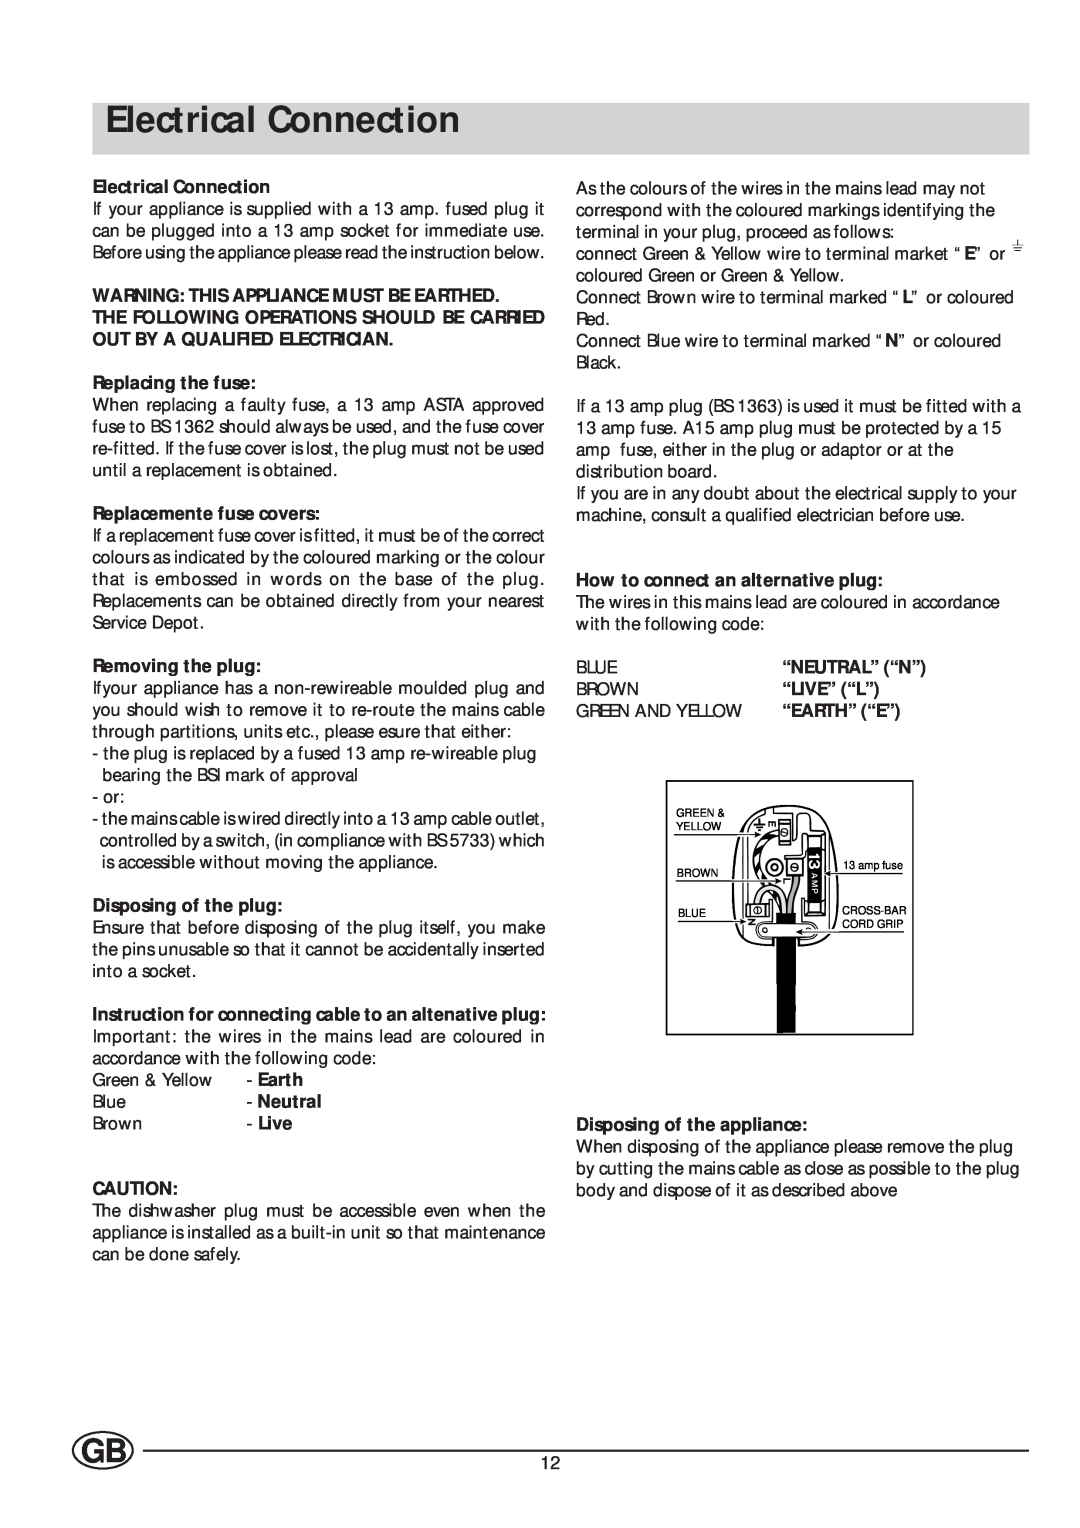 Indesit IDE 1000 Electrical Connection, Warning This Appliance Must Be Earthed, Replacing the fuse, Removing the plug 